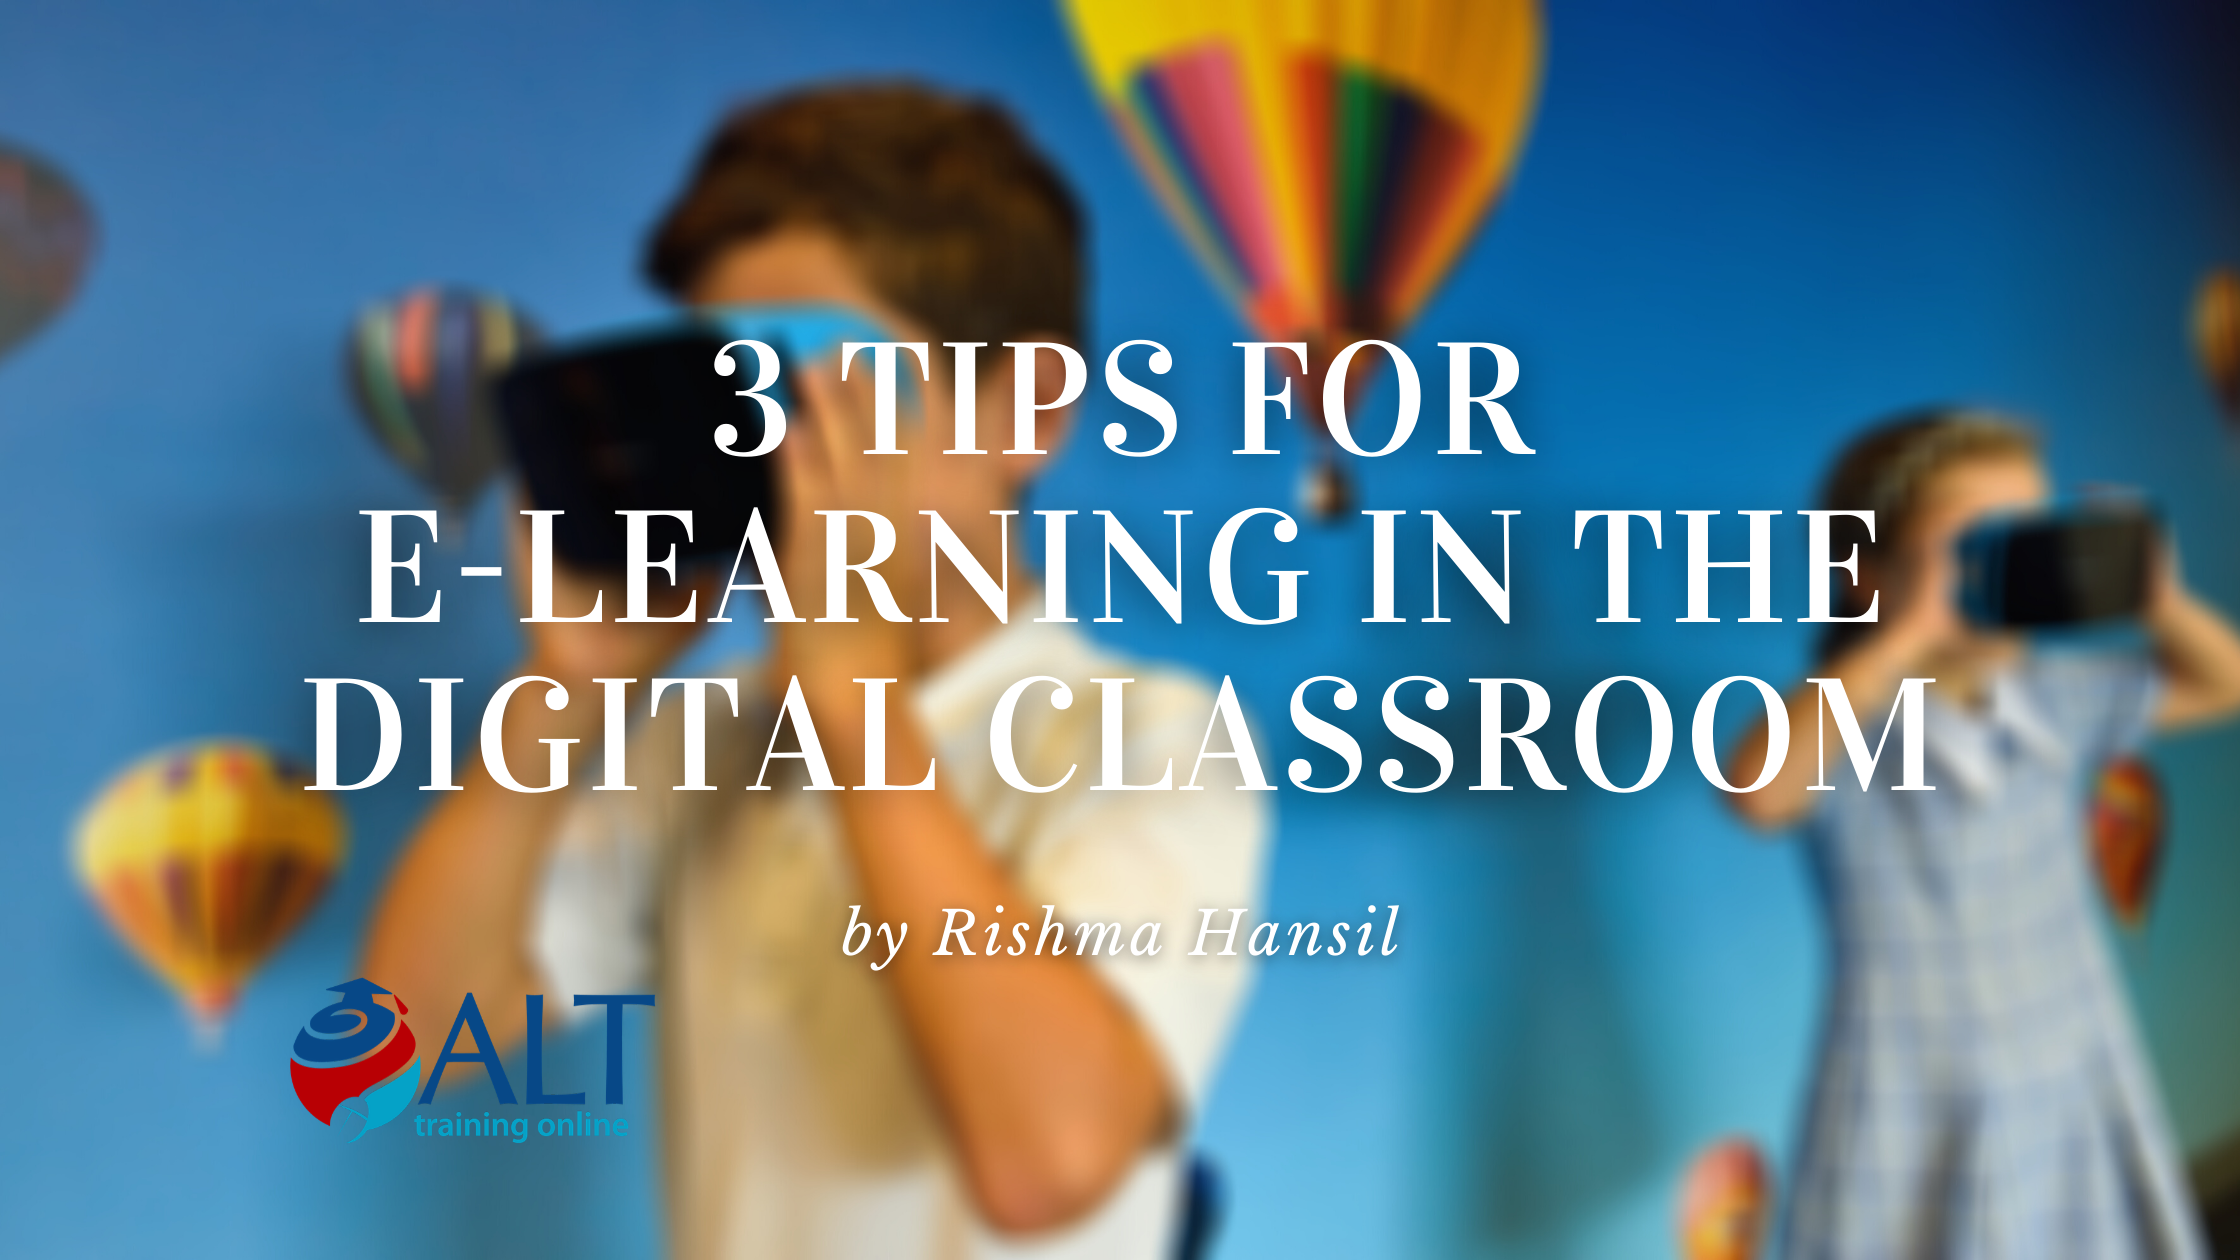 You are currently viewing 3 Tips for E-learning in the Digital Classroom by Rishma Hansil